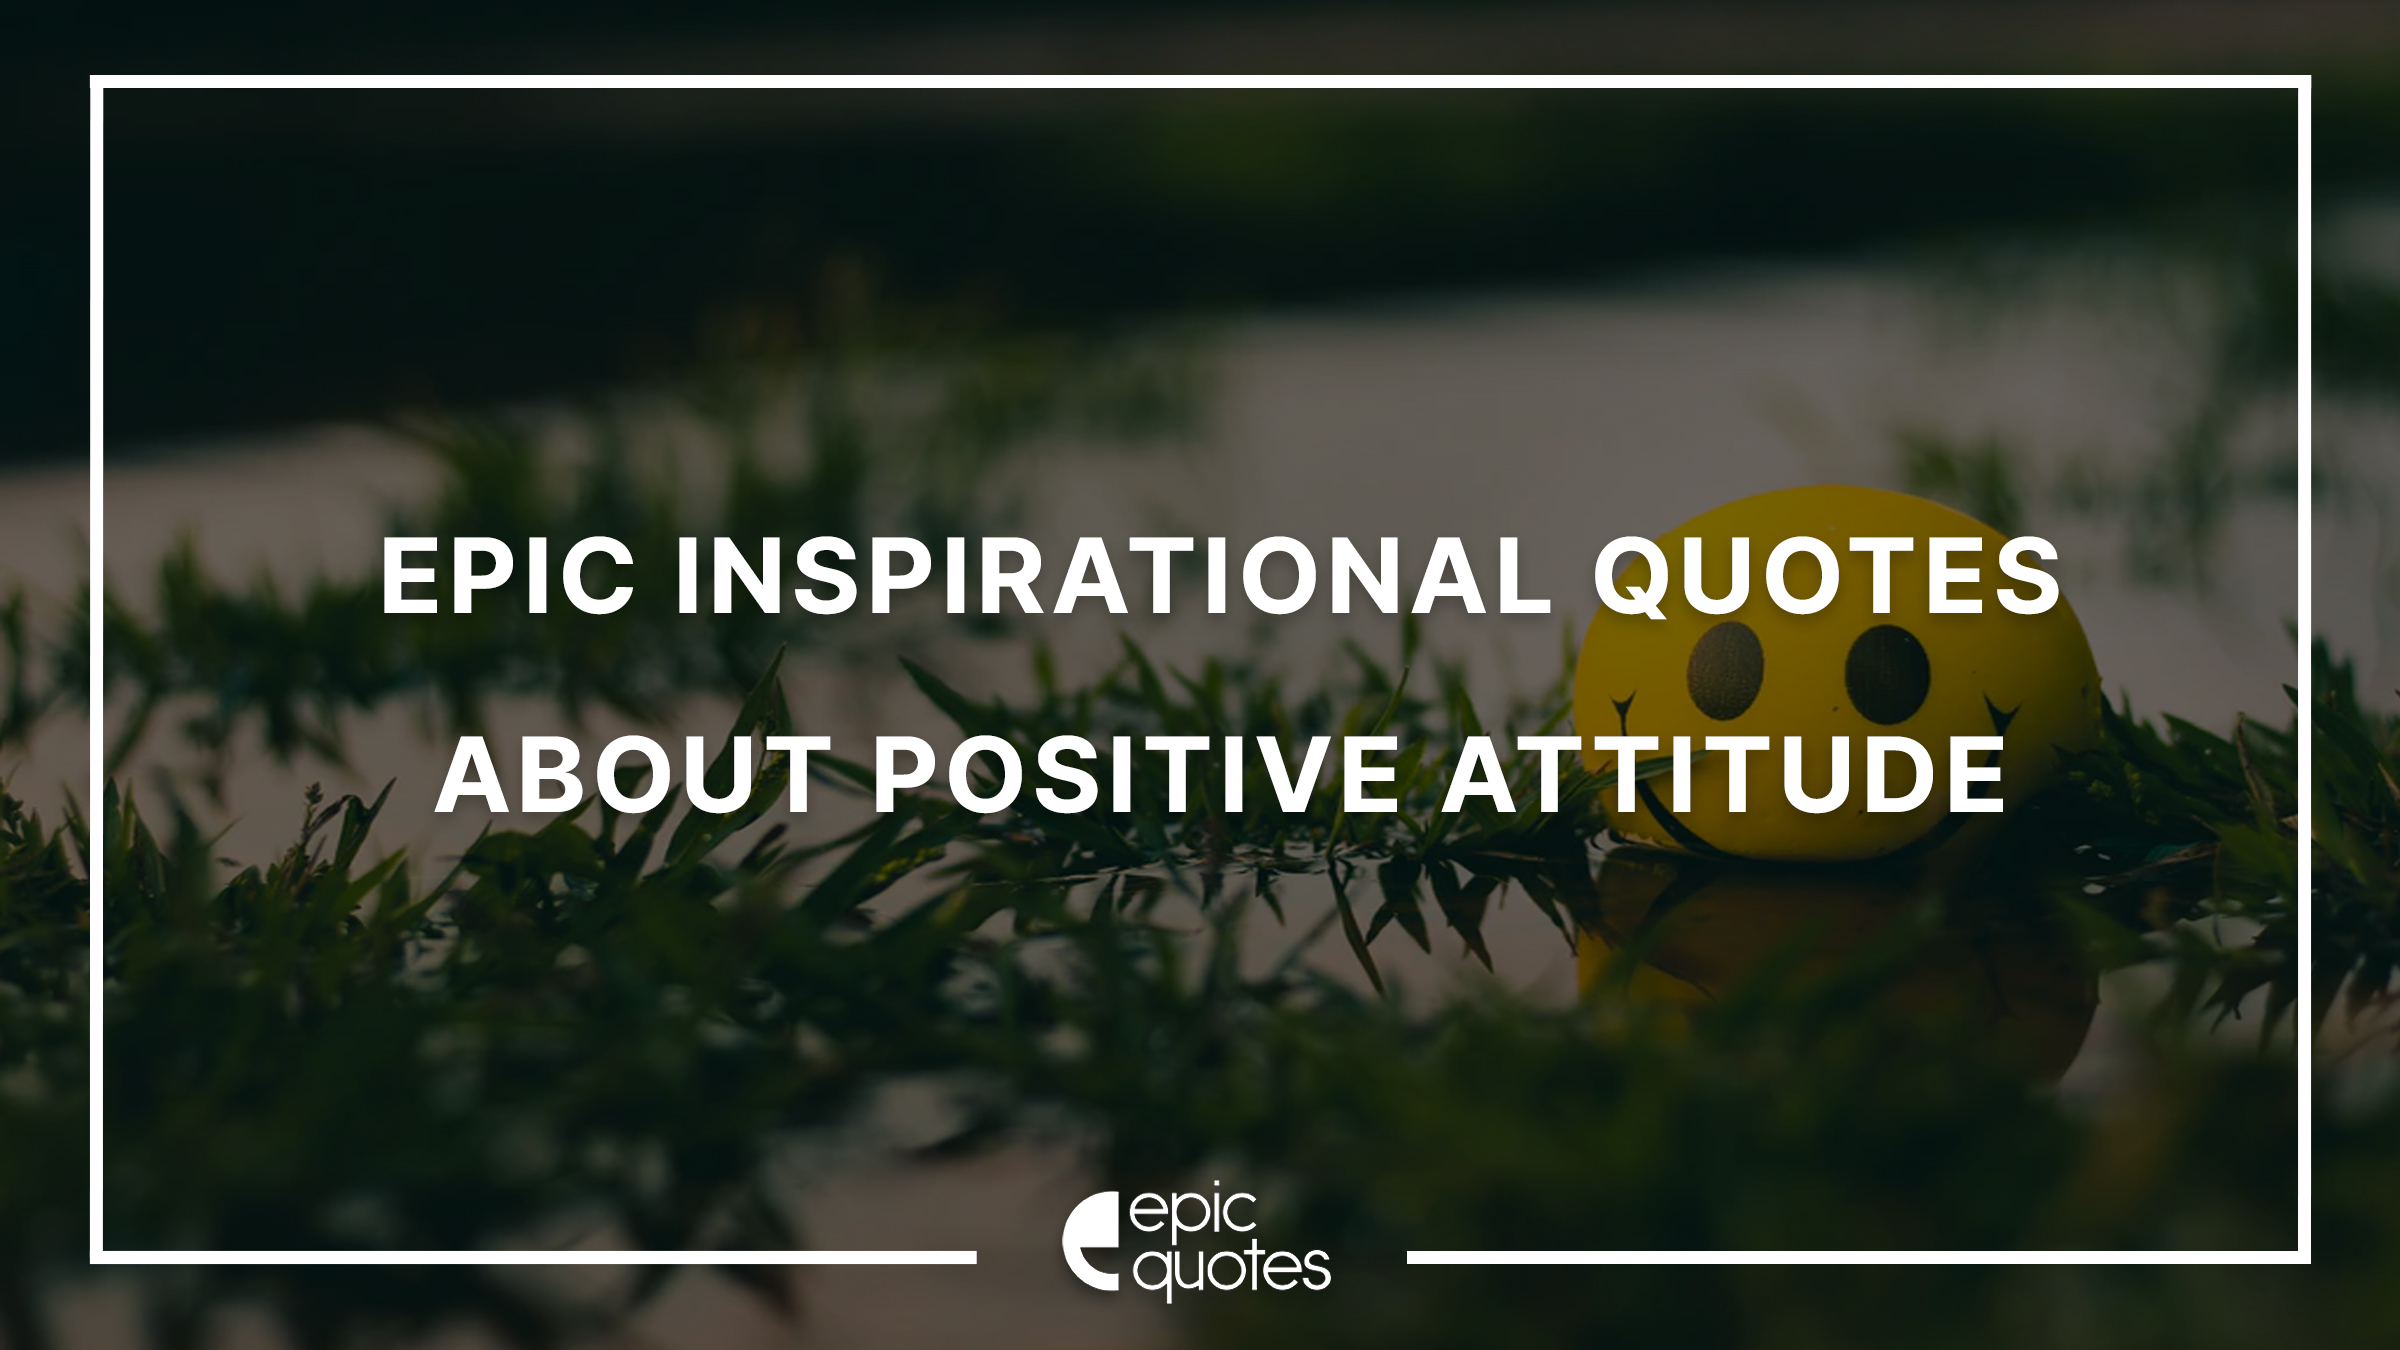 Epic Inspirational Quotes About Positive Attitude Towards Life